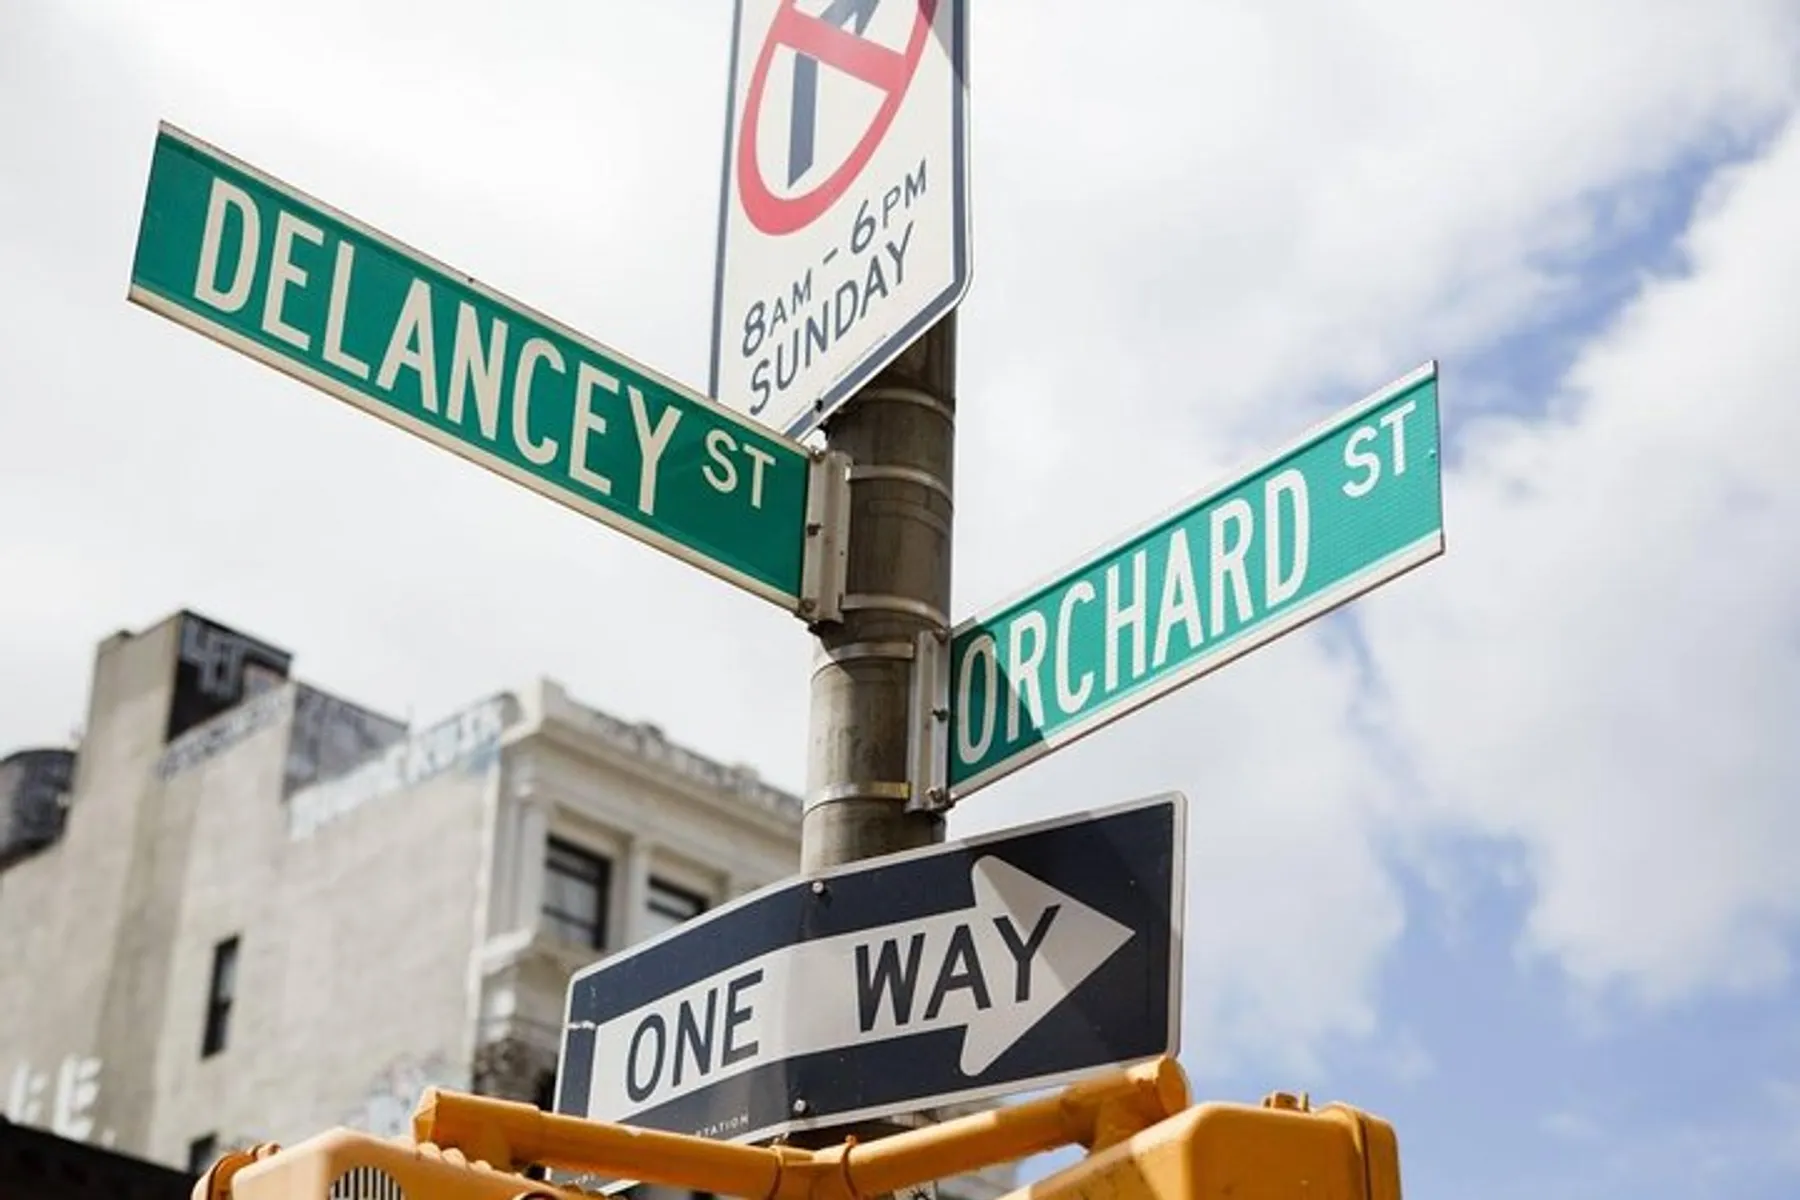 The image shows street signs at the intersection of Delancey Street and Orchard Street with a 'No Parking' sign and a 'One Way' sign attached to a traffic light pole against a partly cloudy sky.